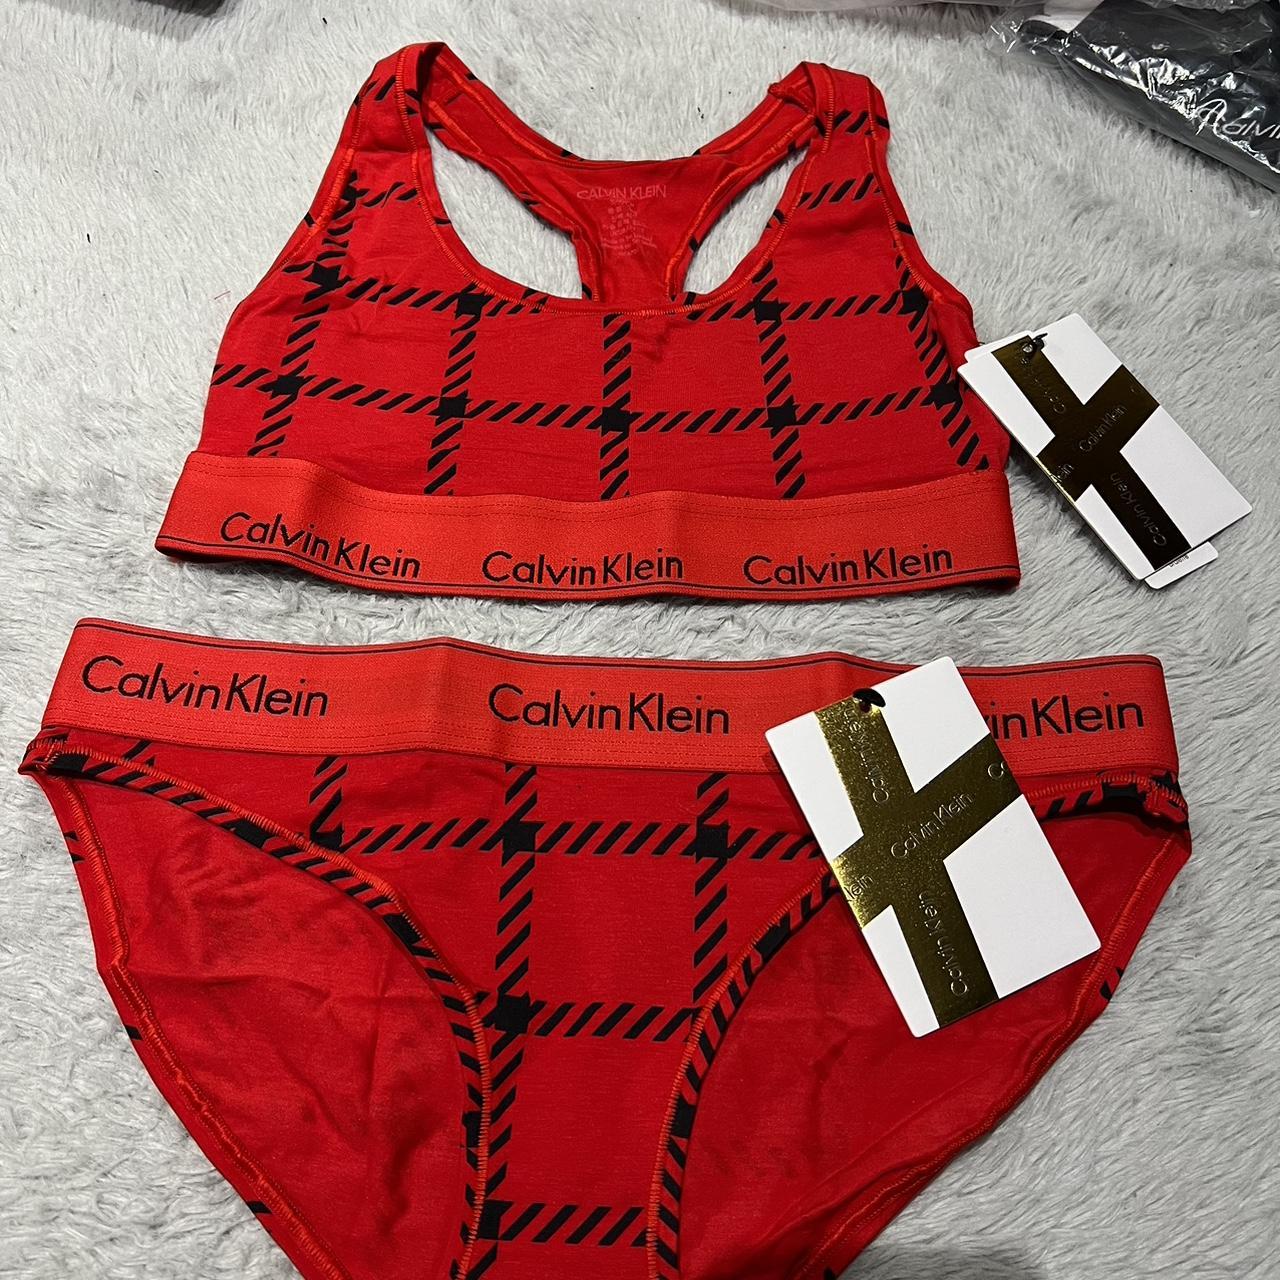 You're getting Authentic NEW Calvin Klein Set 2 - Depop